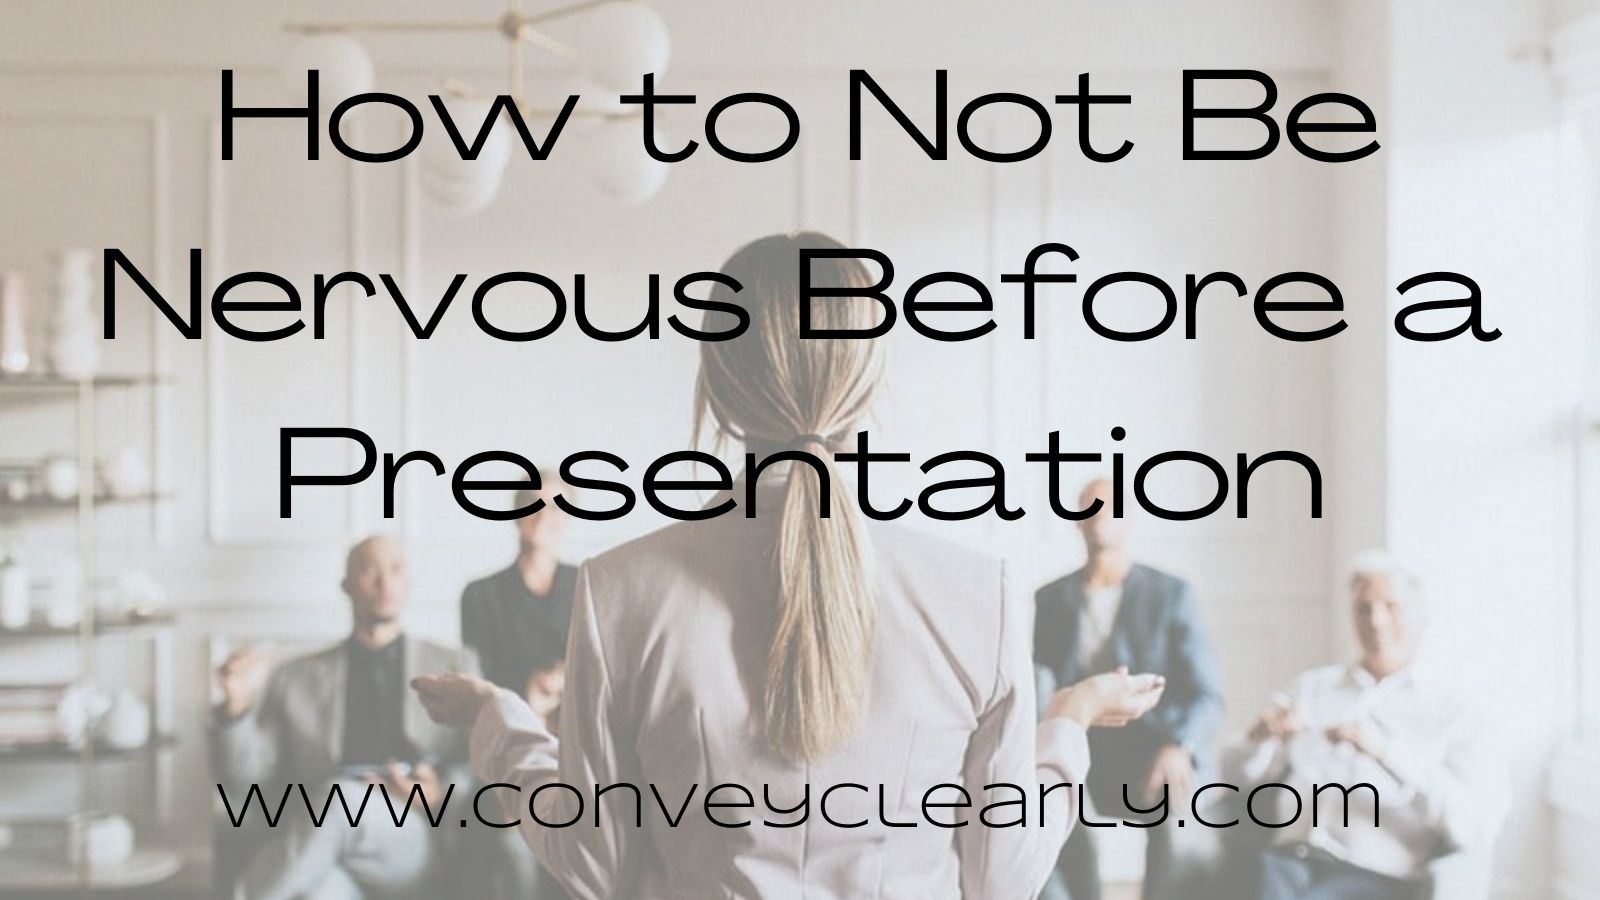 how to make a presentation without being nervous